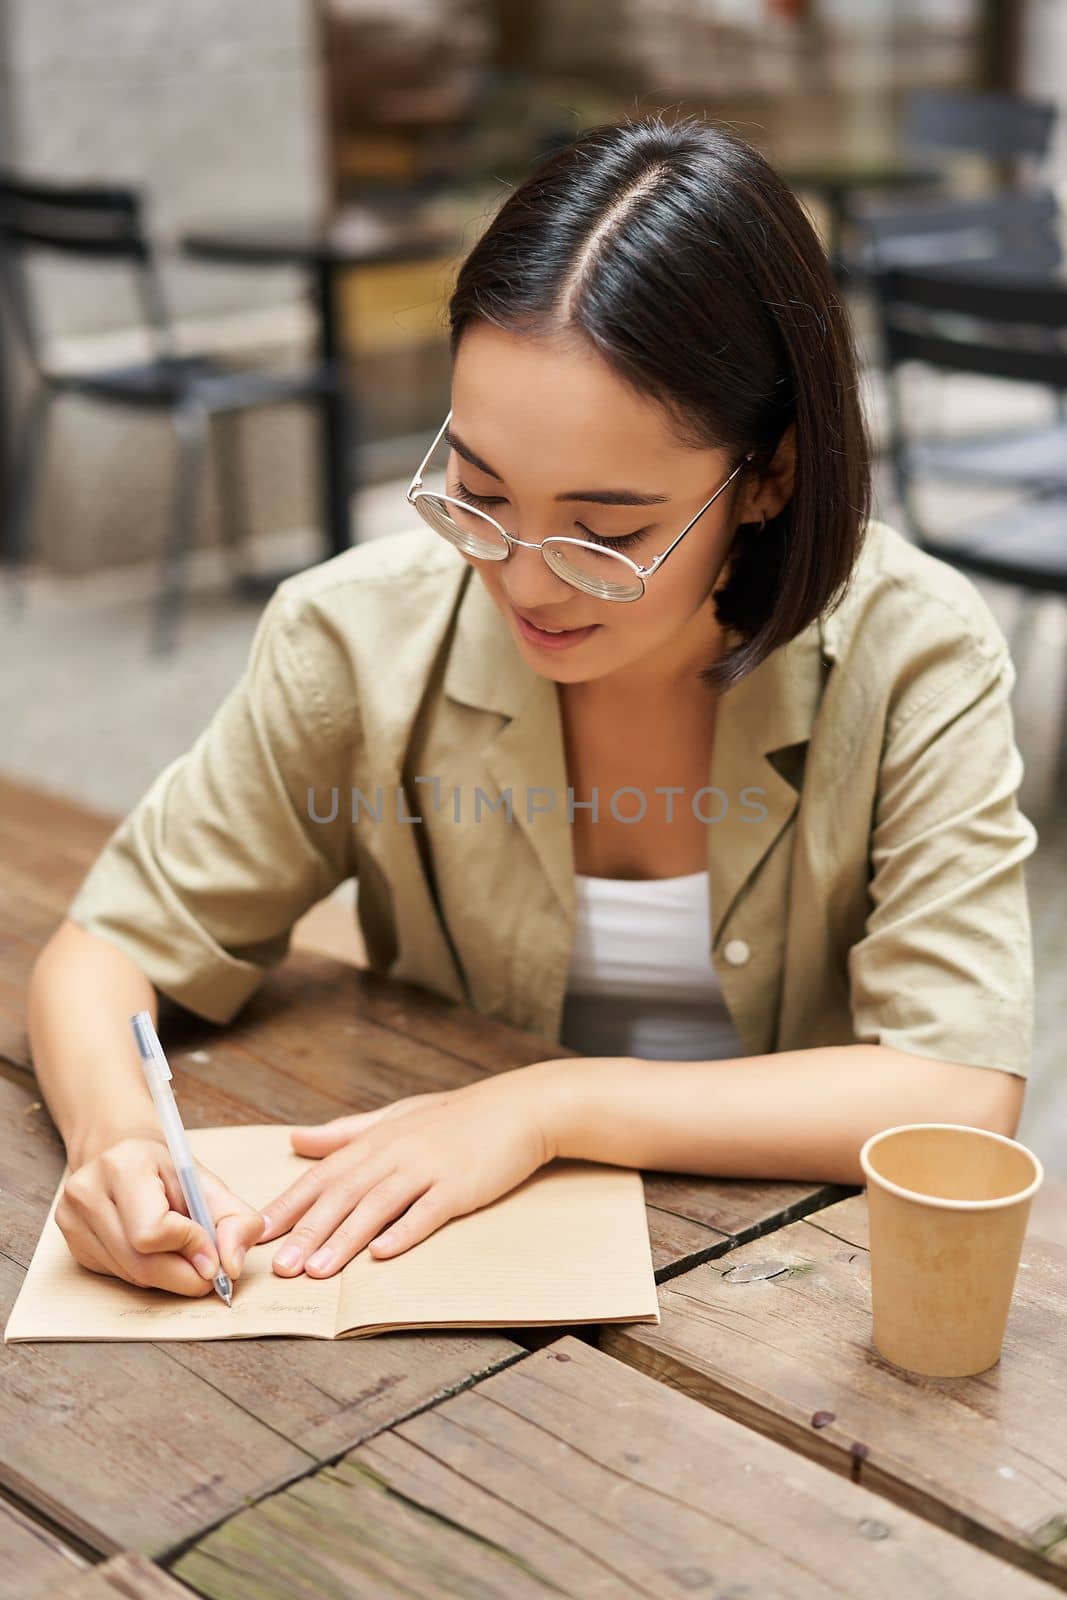 Vertical shot of young asian woman doing homework, making notes, writing something down, sitting in an outdoors cafe and drinking coffee.